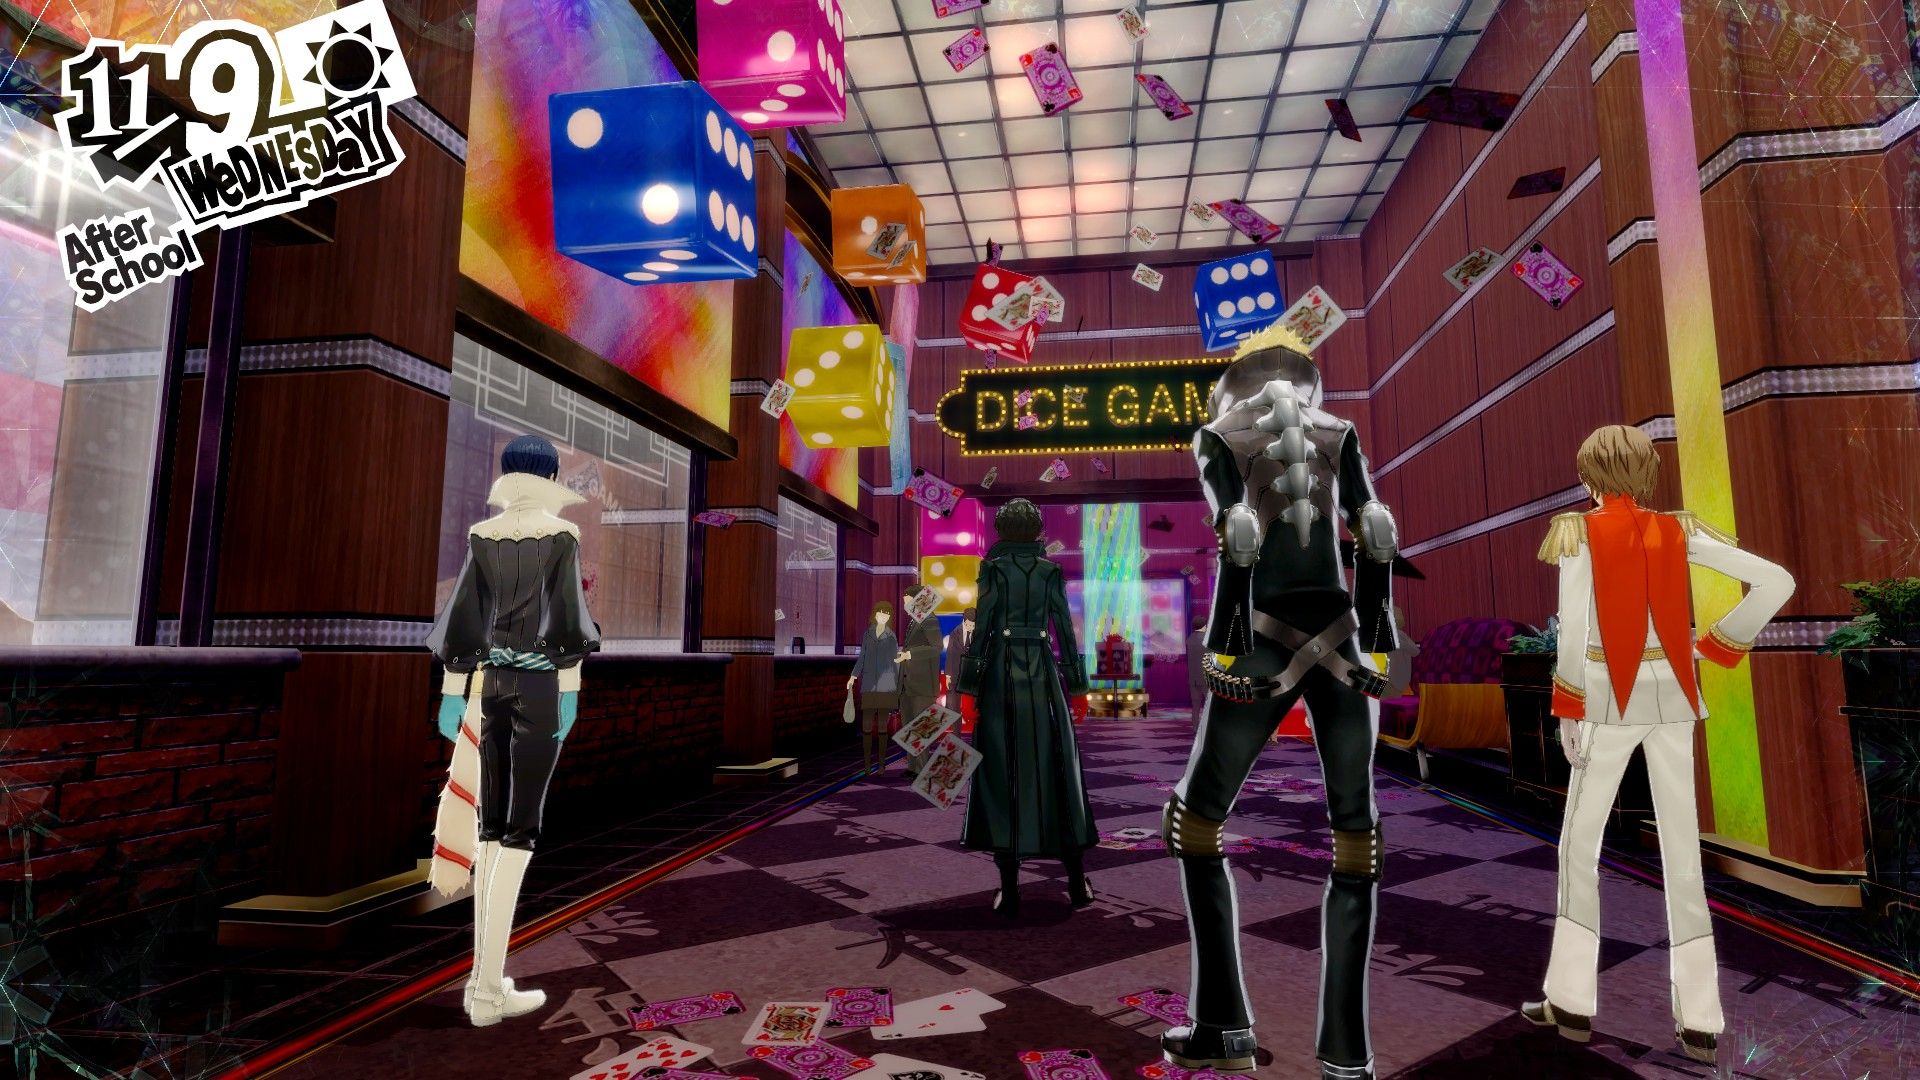 Persona 5 Royal Dice Game Area